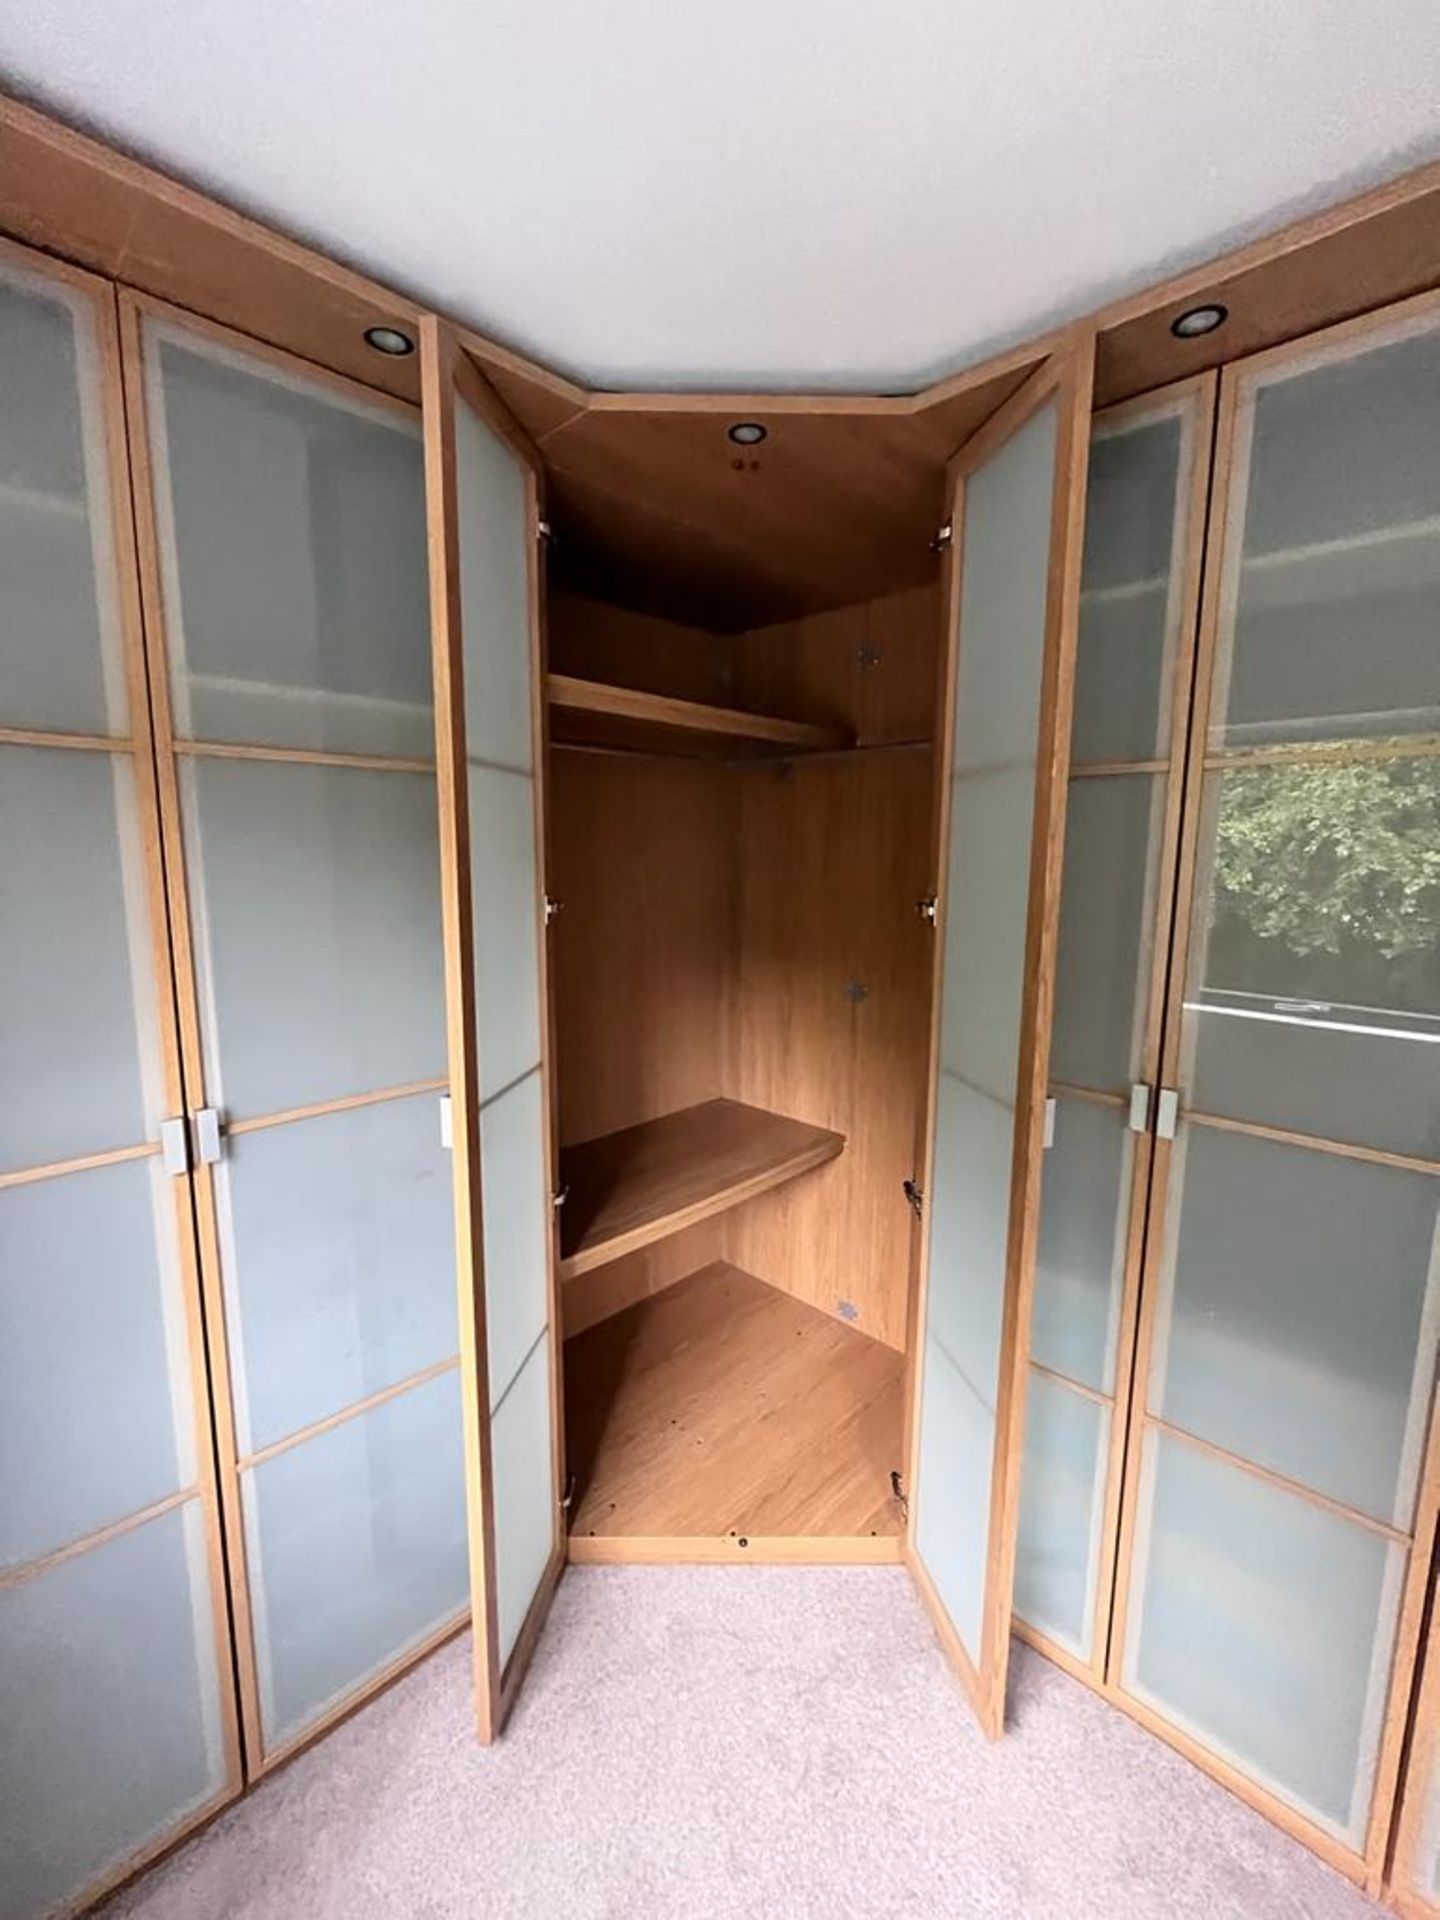 Large Bank Of Bespoke Fitted Master Bedroom Wardrobe Storage With Frosted Glass 8-Door Frontage - - Image 6 of 8